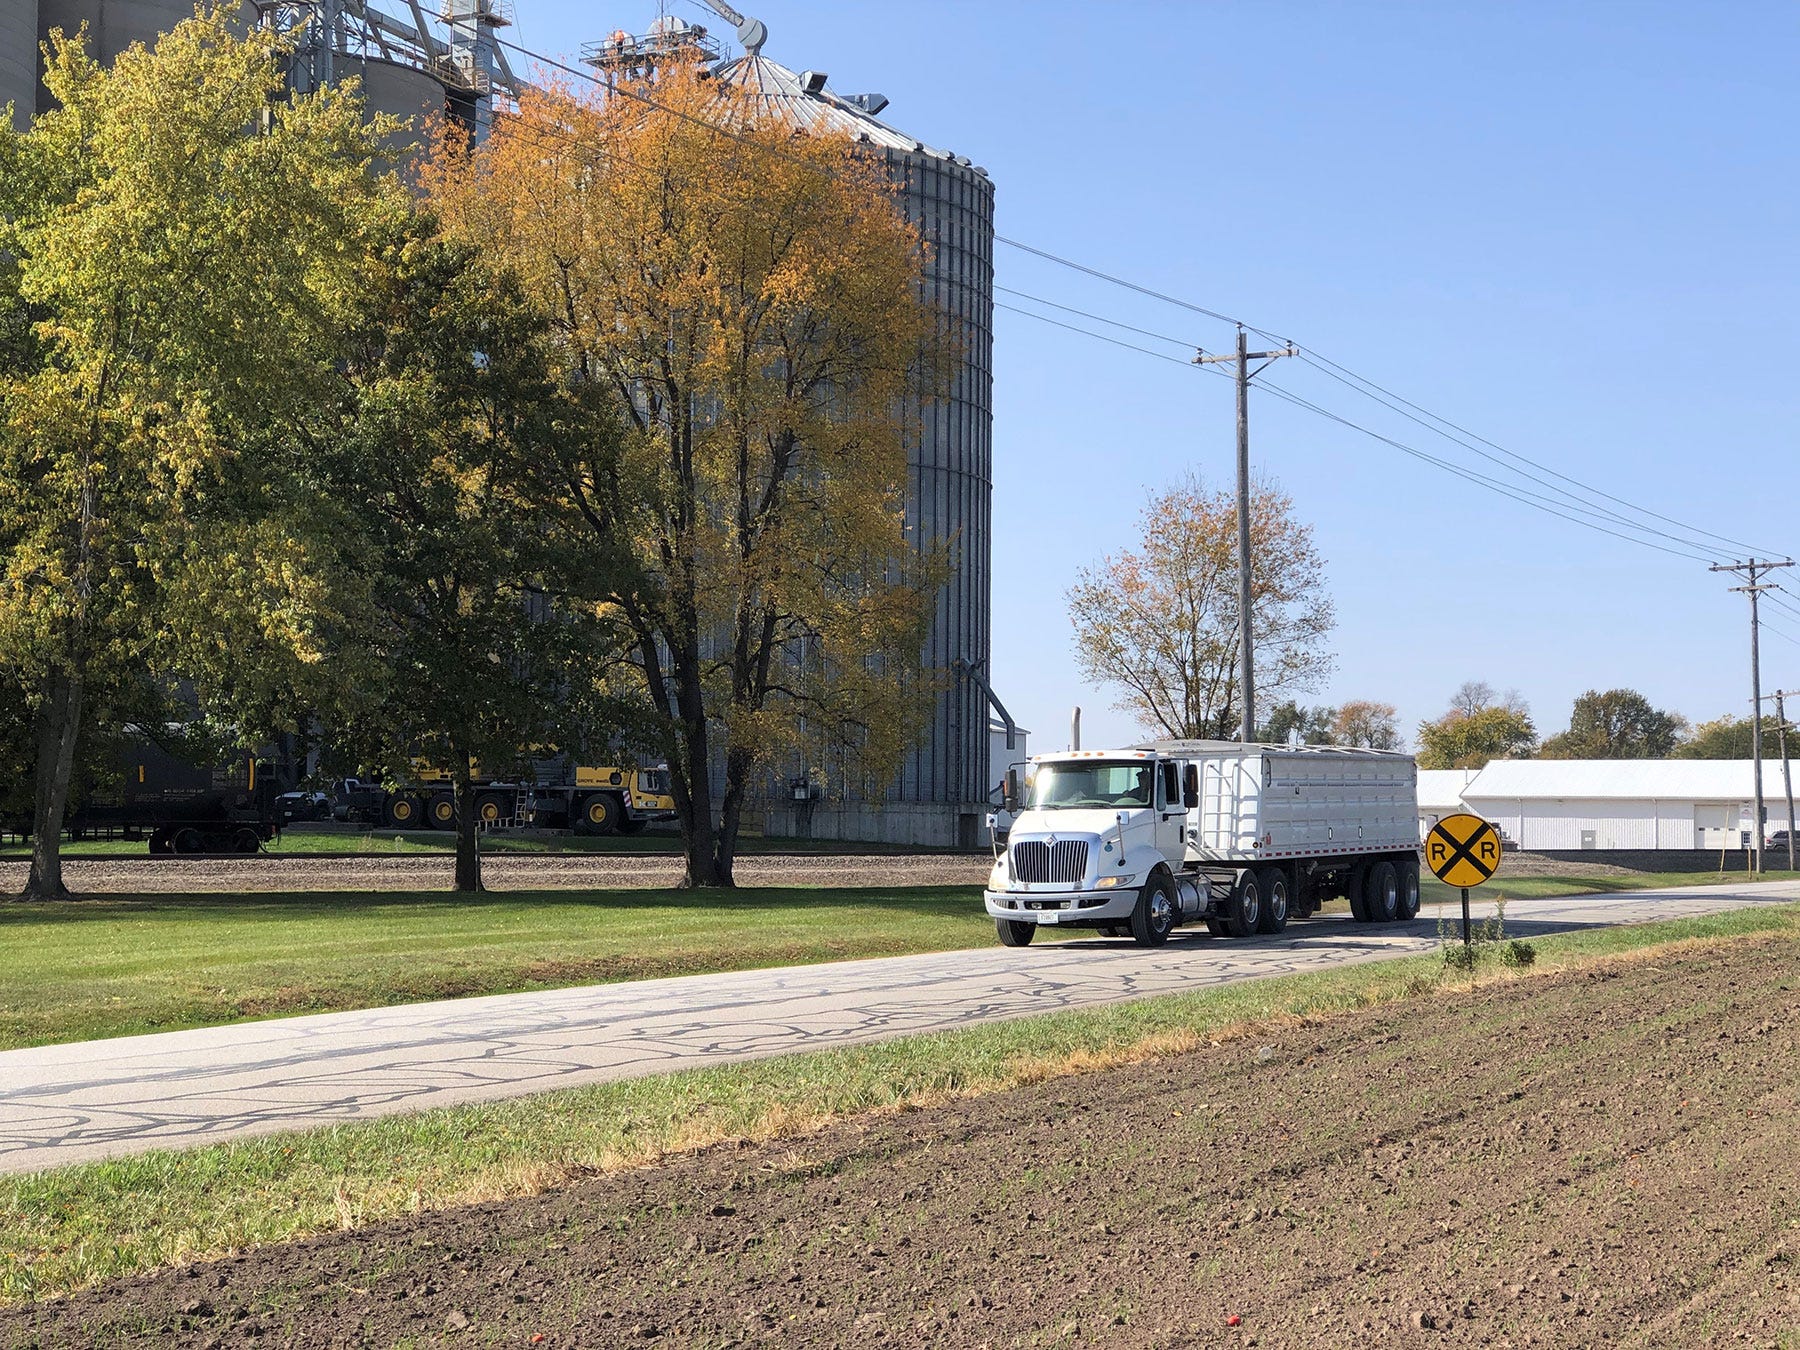 A semi tractor driving down a rural road next to a grain storage facility